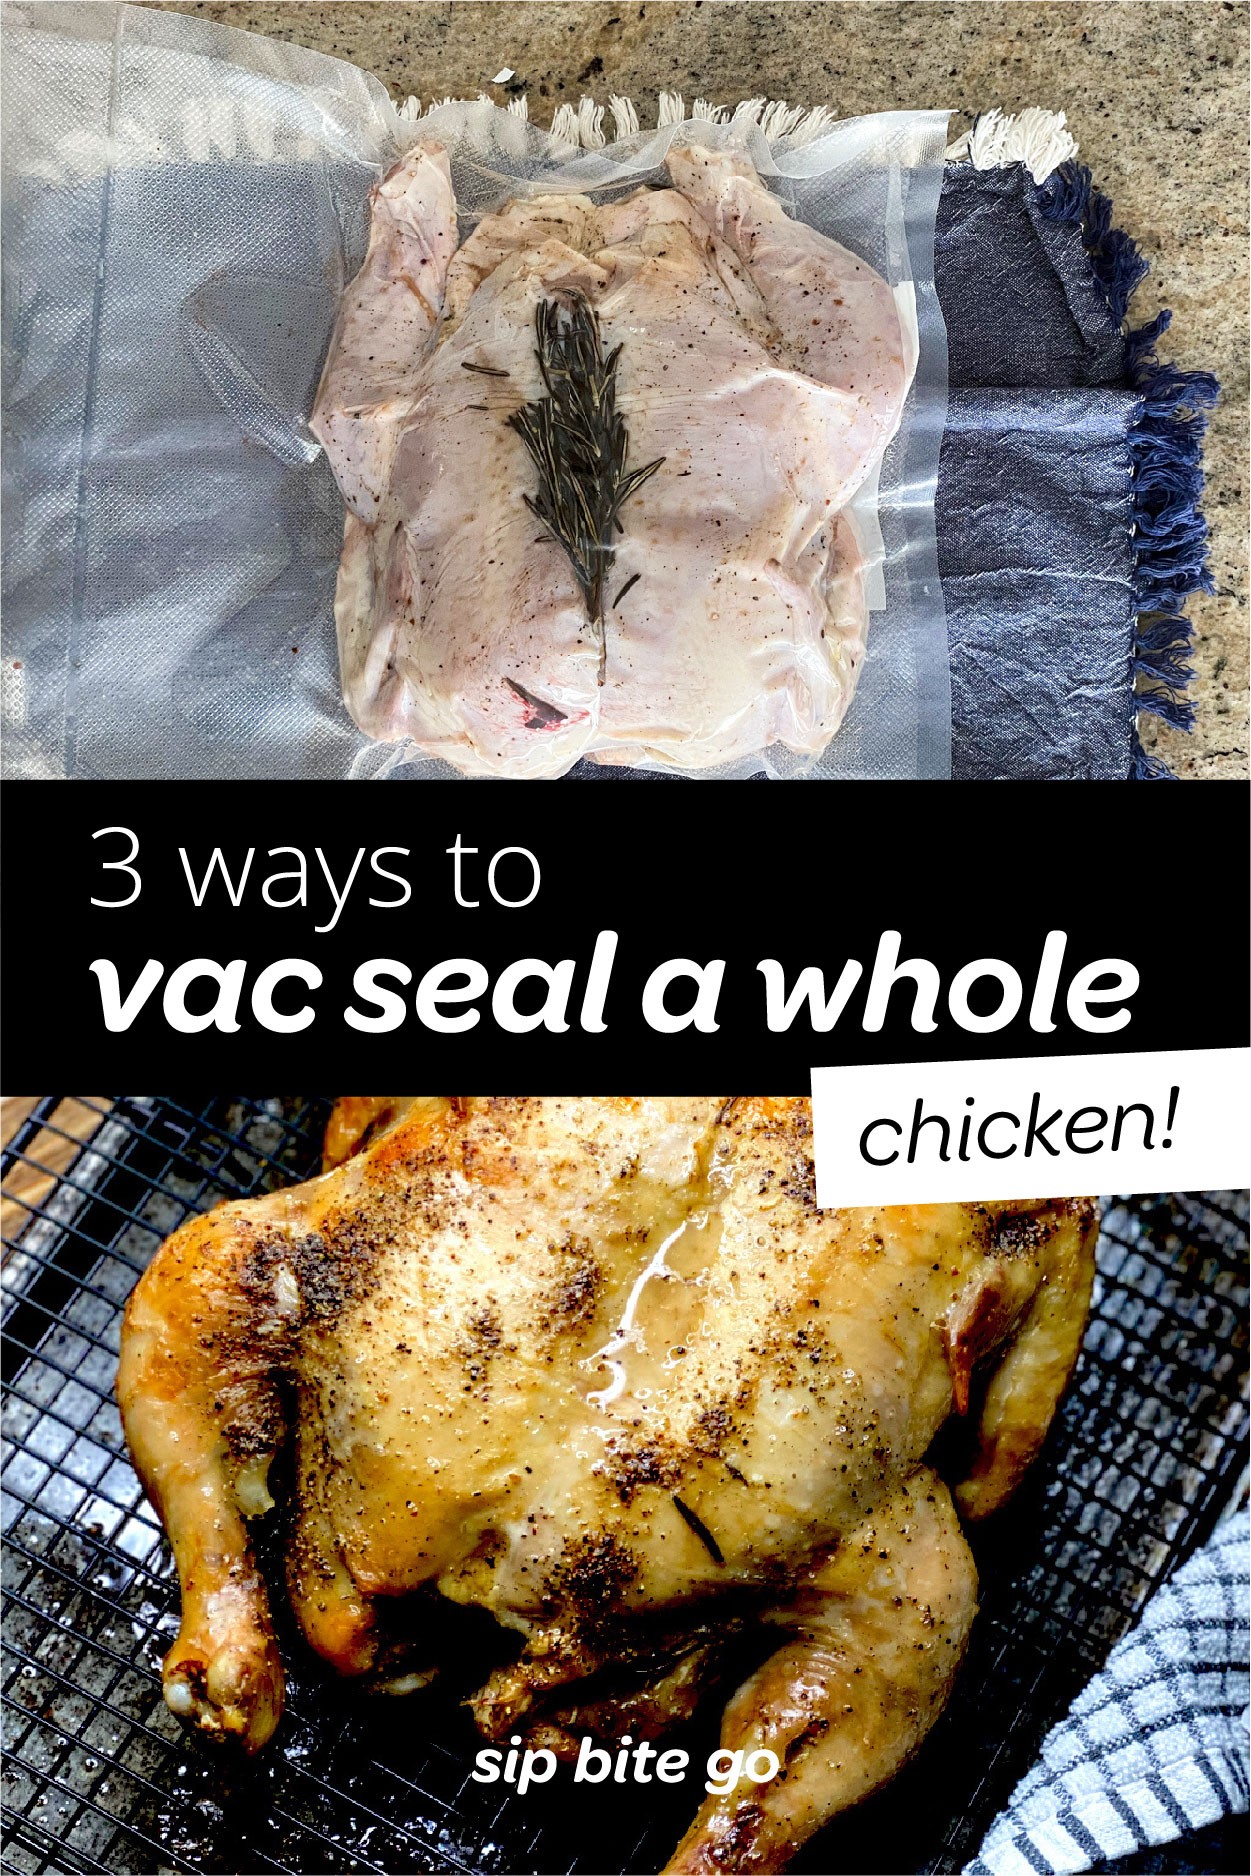 How To Vacuum Seal A Whole Chicken For Sous Vide Cooking | Sip Bite Go